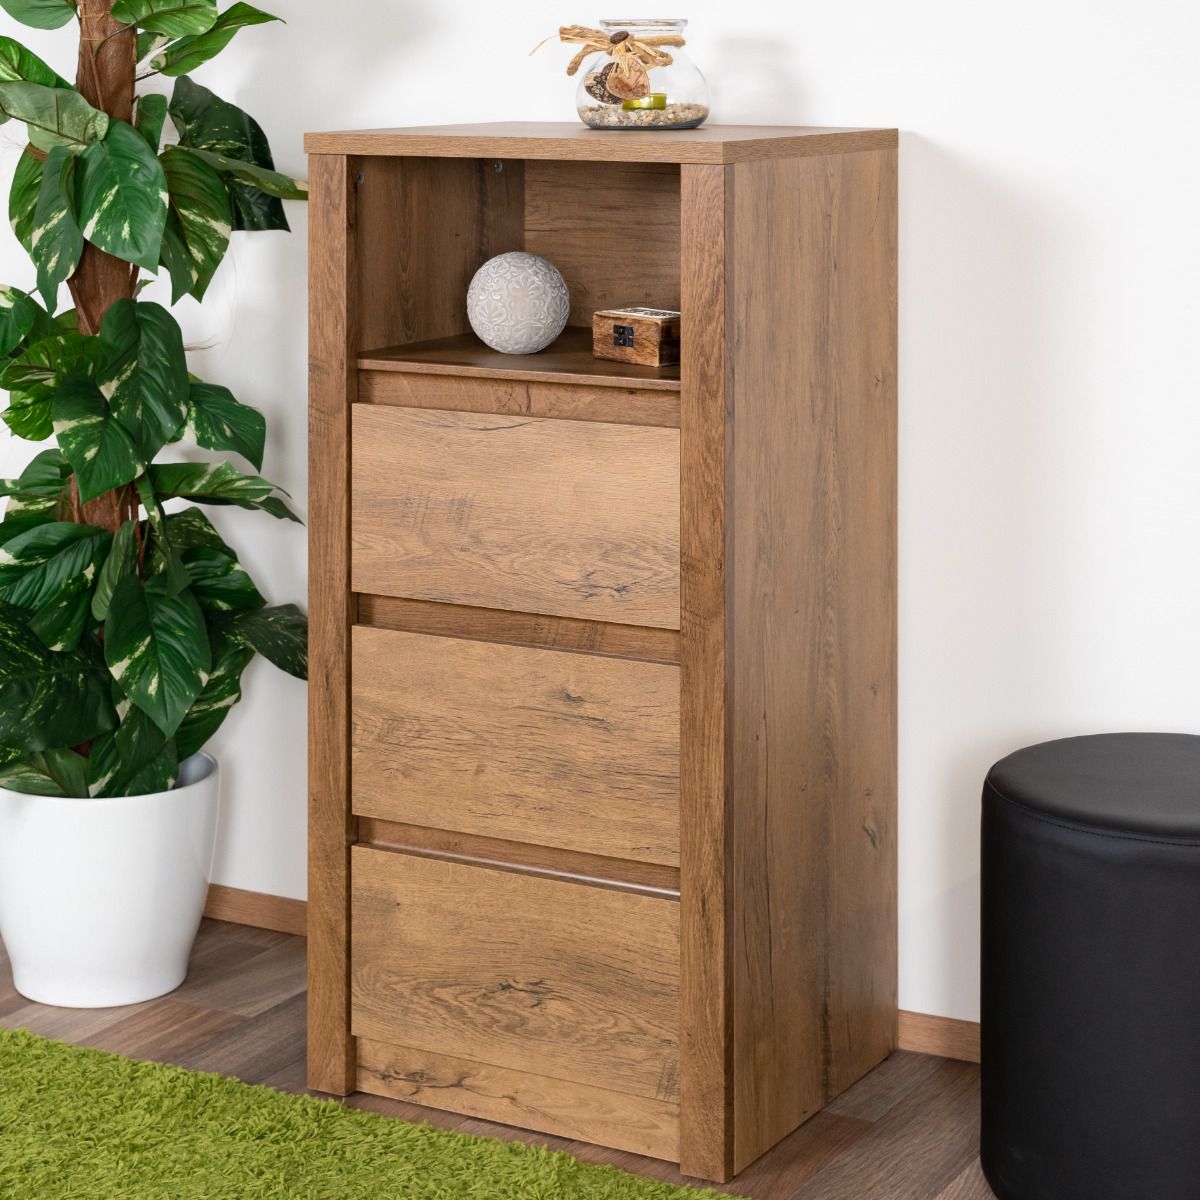 Chest of drawers Selun 21, color: dark brown oak - 103 x 50 x 46 cm (H x W x D)